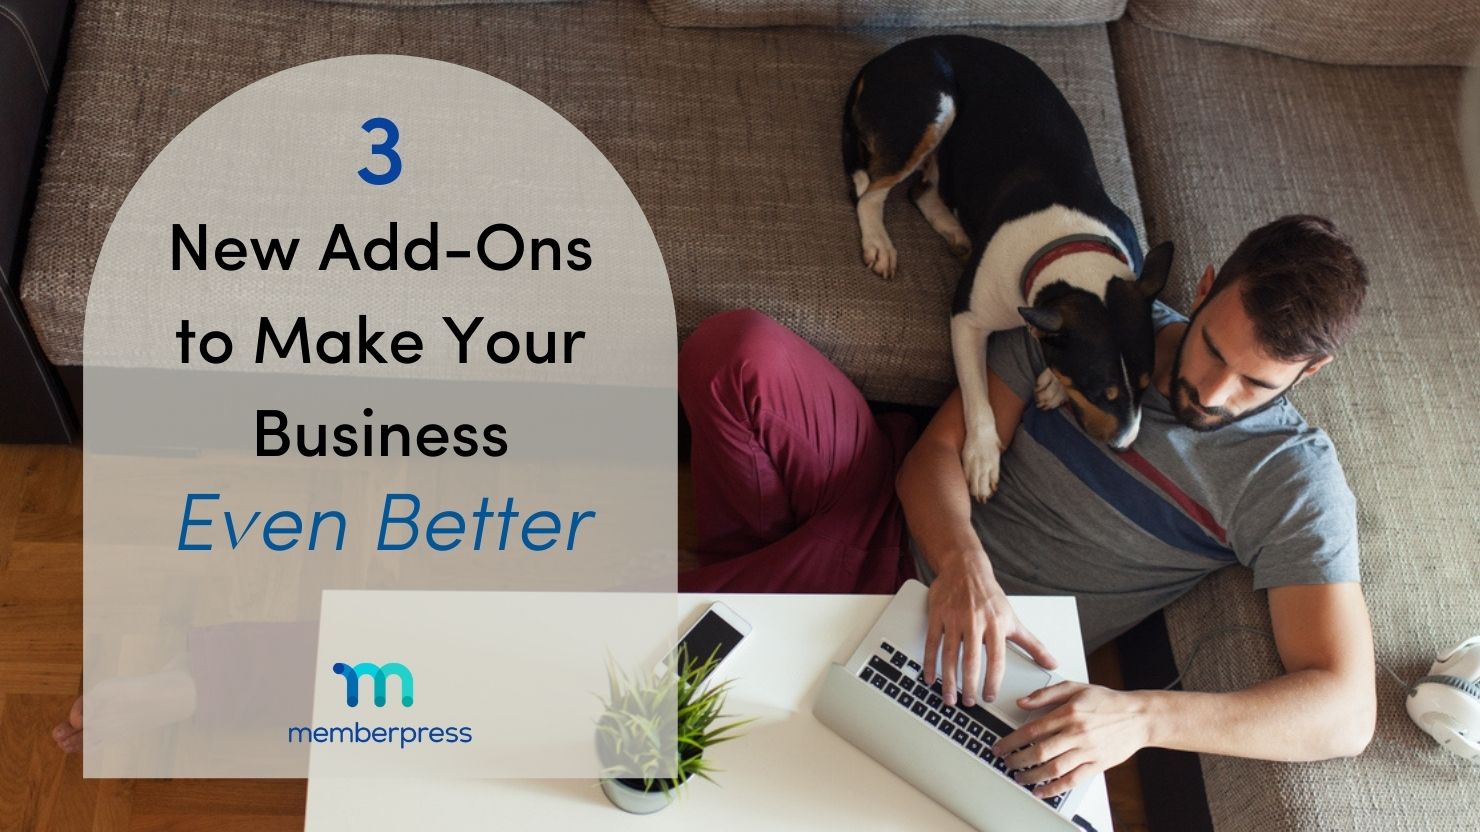 3 new add-ons to make your business even better